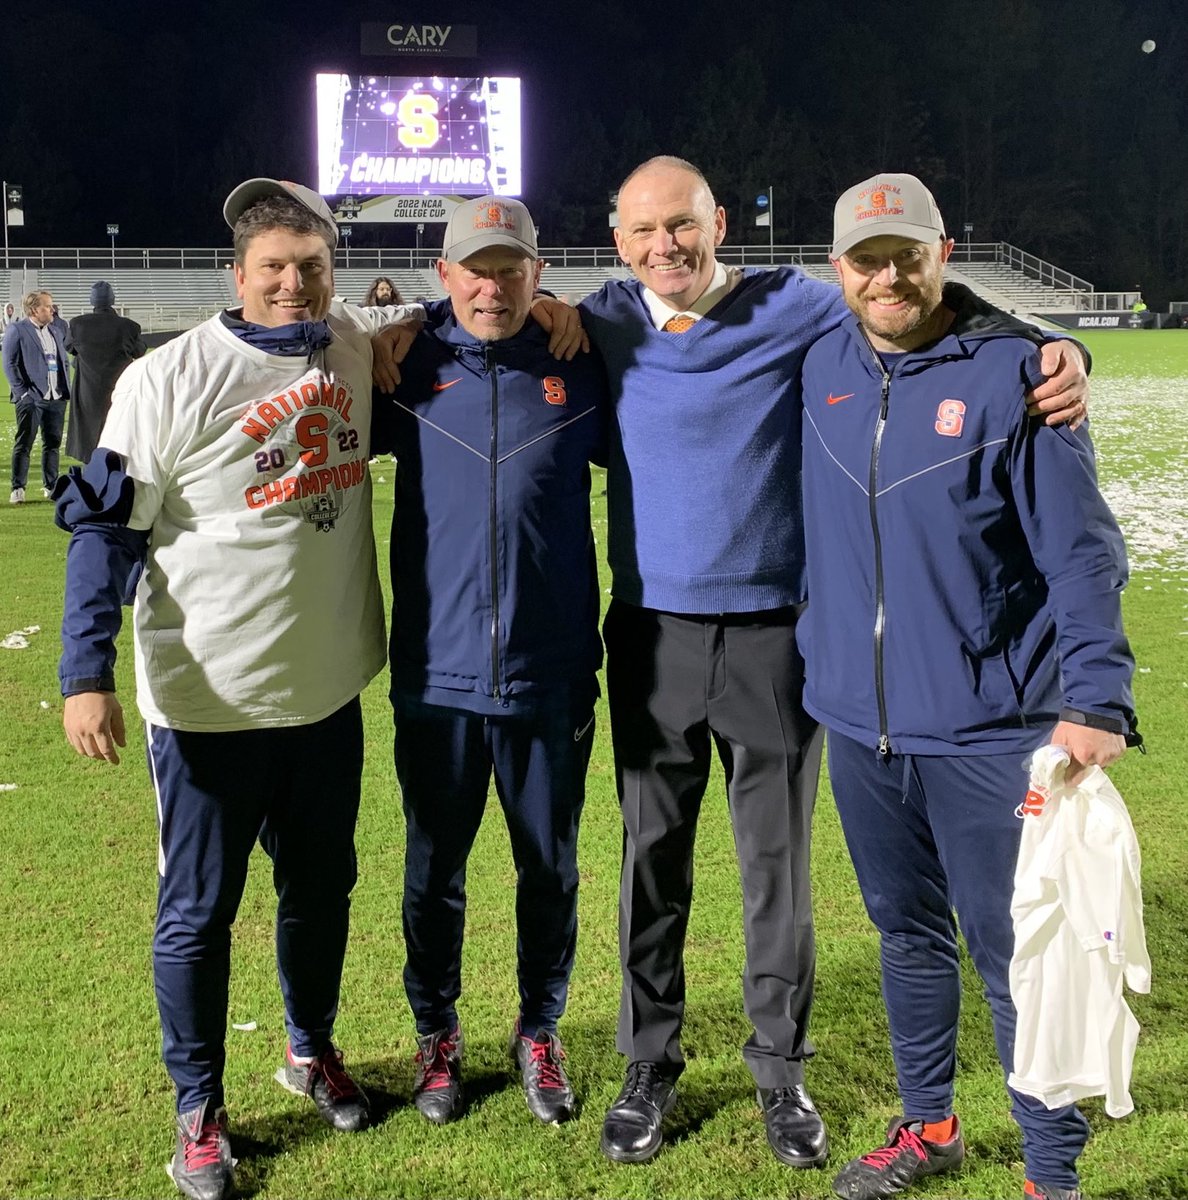 Congratulations to Coach Flynn on his appointment with ⁦@RSLAcademy⁩ - We are all very excited for Michael and Mimi. It has been a real privilege to work alongside one of the very best GK coaches in the country. The Flynn family always has a home here in Syracuse. 🍊⚽️🧡🧤